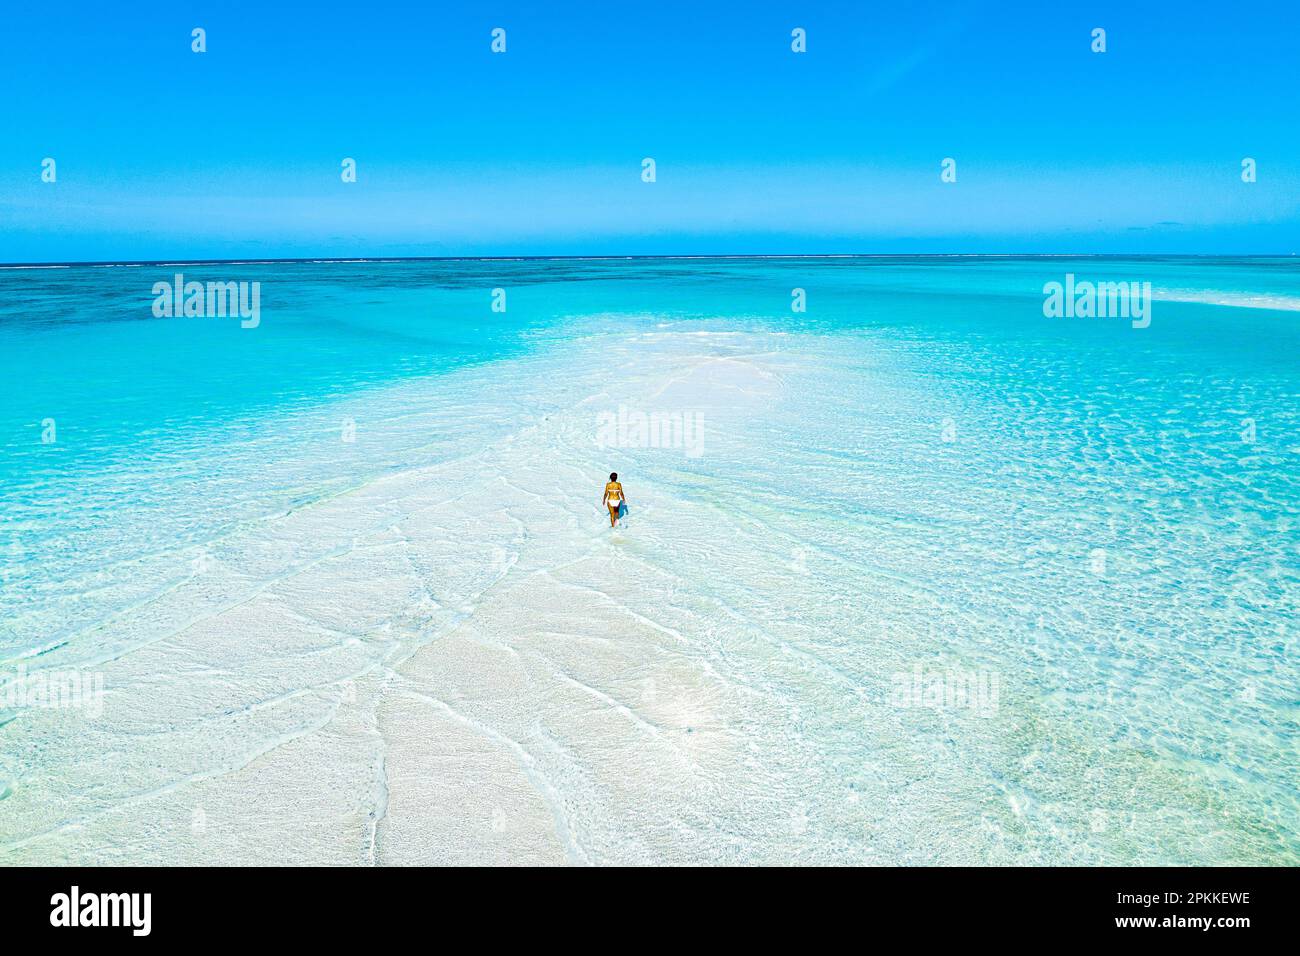 Aerial view of woman bathing in the transparent sea in the scenic sandbanks, Nungwi, Zanzibar, Tanzania, East Africa, Africa Stock Photo